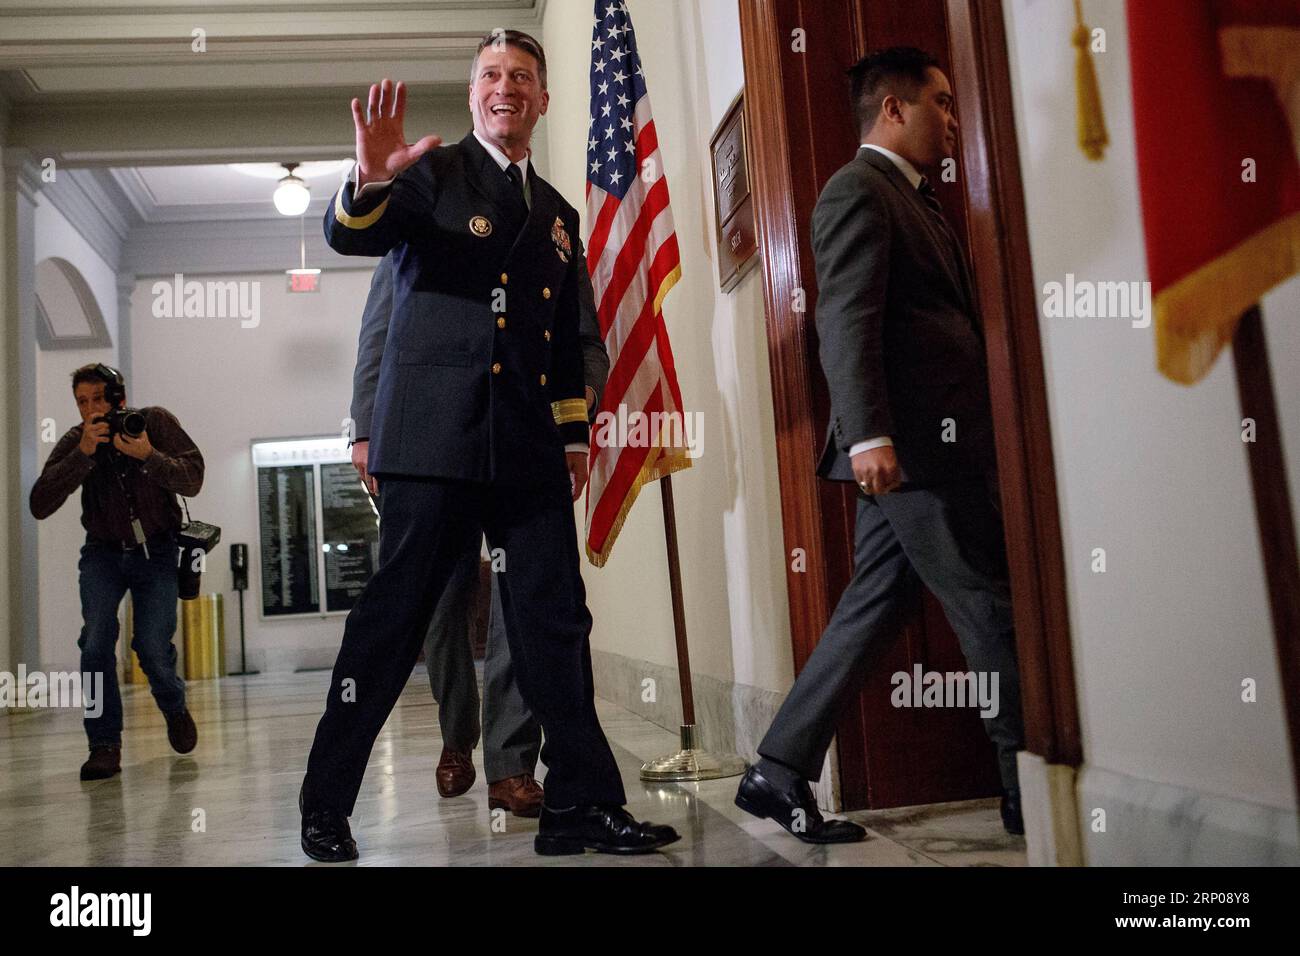 Bilder des Tages 180426 -- WASHINGTON, April 26, 2018 -- Veterans Affairs Secretary nominee Ronny Jackson L, front is seen on Capitol Hill in Washington D.C., the United States, on April 16, 2018. White House physician Ronny Jackson announced on April 26 that he had withdrawn from President Donald Trump s nomination to be the next Veterans Affairs Secretary, in the wake of a series of allegations that he had fostered a hostile work environment and behaved improperly while serving as the top doctor in the White House.  U.S.-WASHINGTON D.C.-VETERANS AFFAIRS SECRETARY-NOMINEE-WITHDRAWAL TingxShen Stock Photo